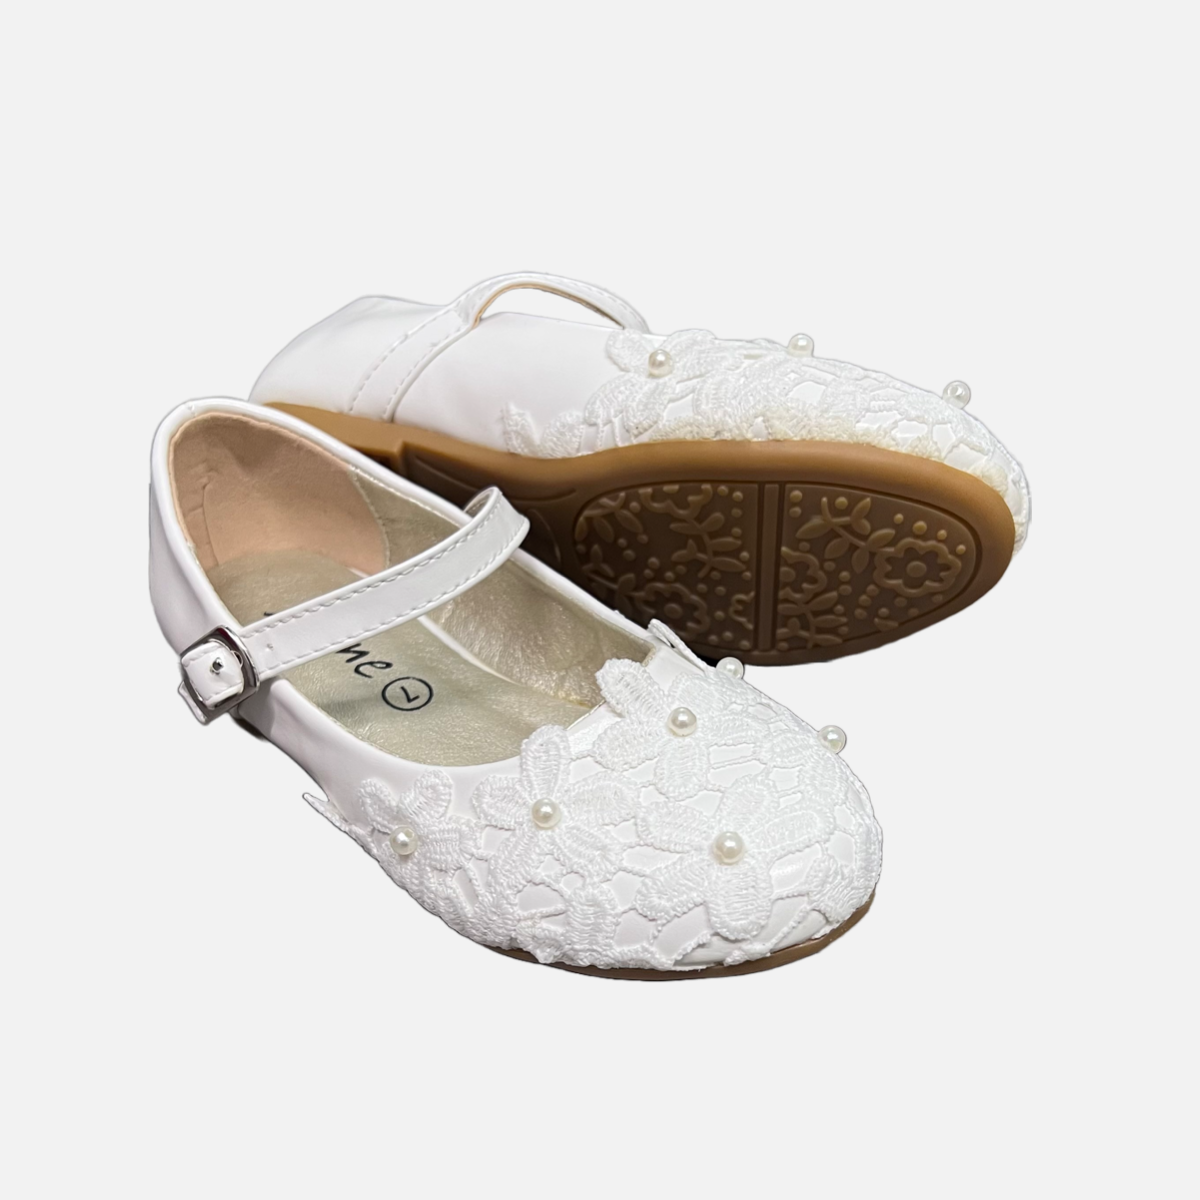 Jolene Floral Embroidered Flats w/ Pearl Accents